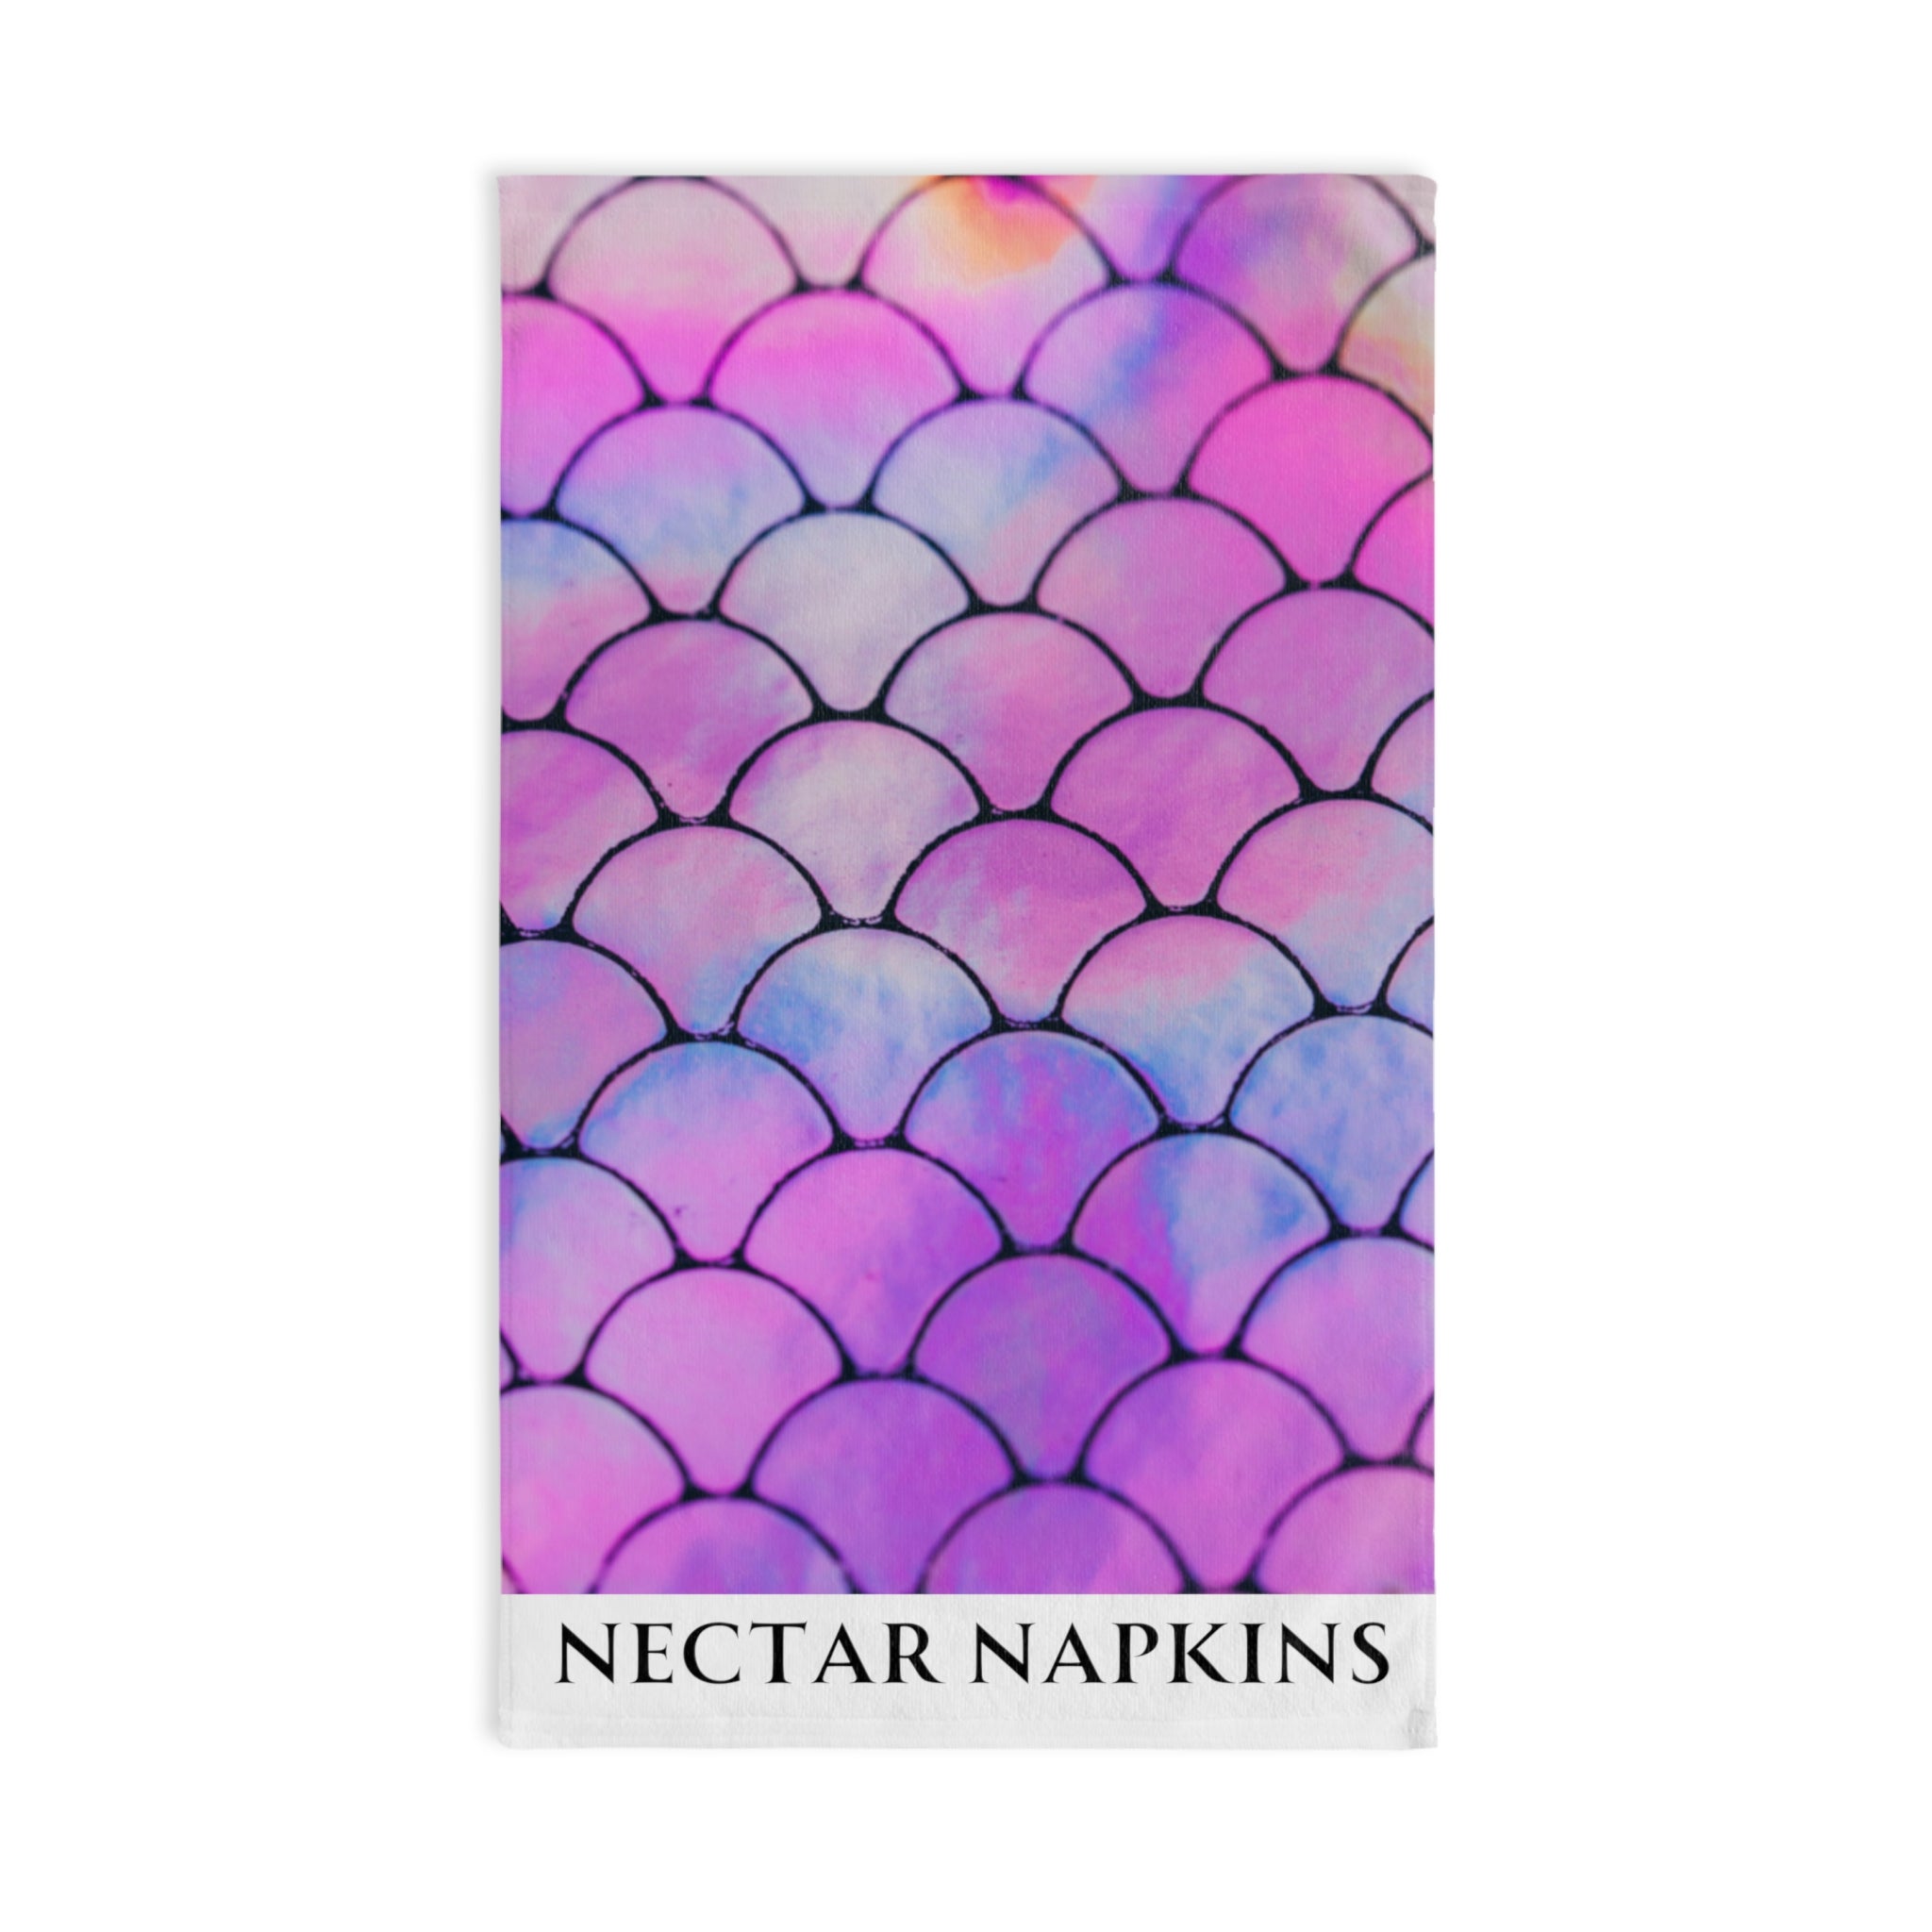 Mermaid Tail Purple White | Funny Gifts for Men - Gifts for Him - Birthday Gifts for Men, Him, Her, Husband, Boyfriend, Girlfriend, New Couple Gifts, Fathers & Valentines Day Gifts, Christmas Gifts NECTAR NAPKINS